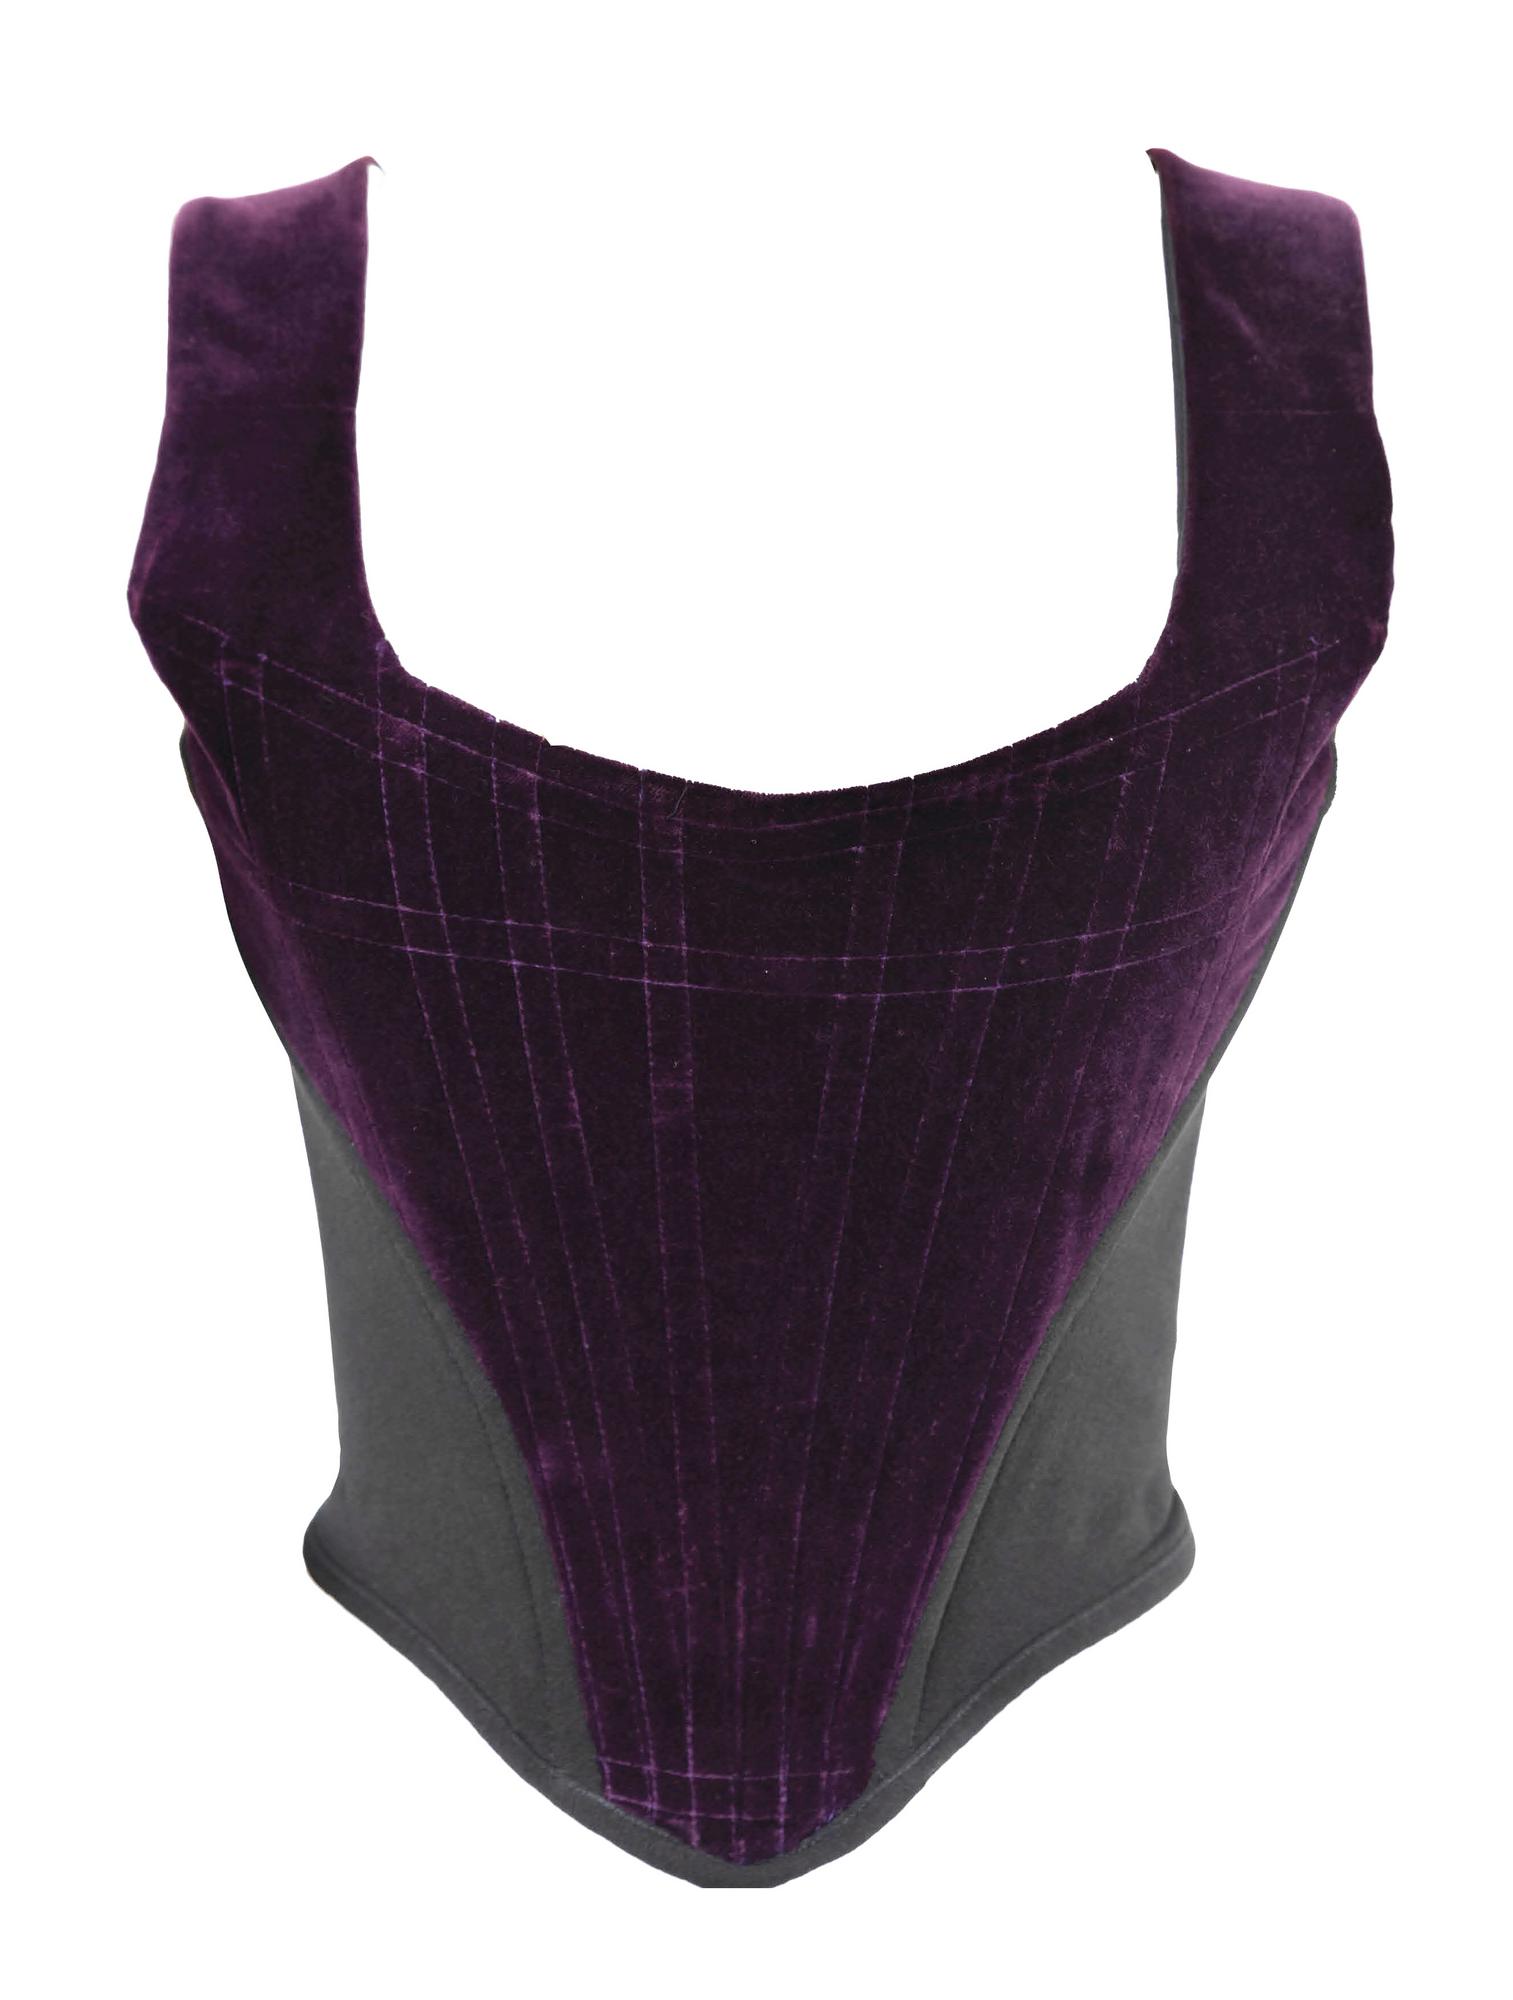 Vivienne Westwood ICONIC AND RARE VELVET BUSTIER DESCRIPTION: Iconic and rare...